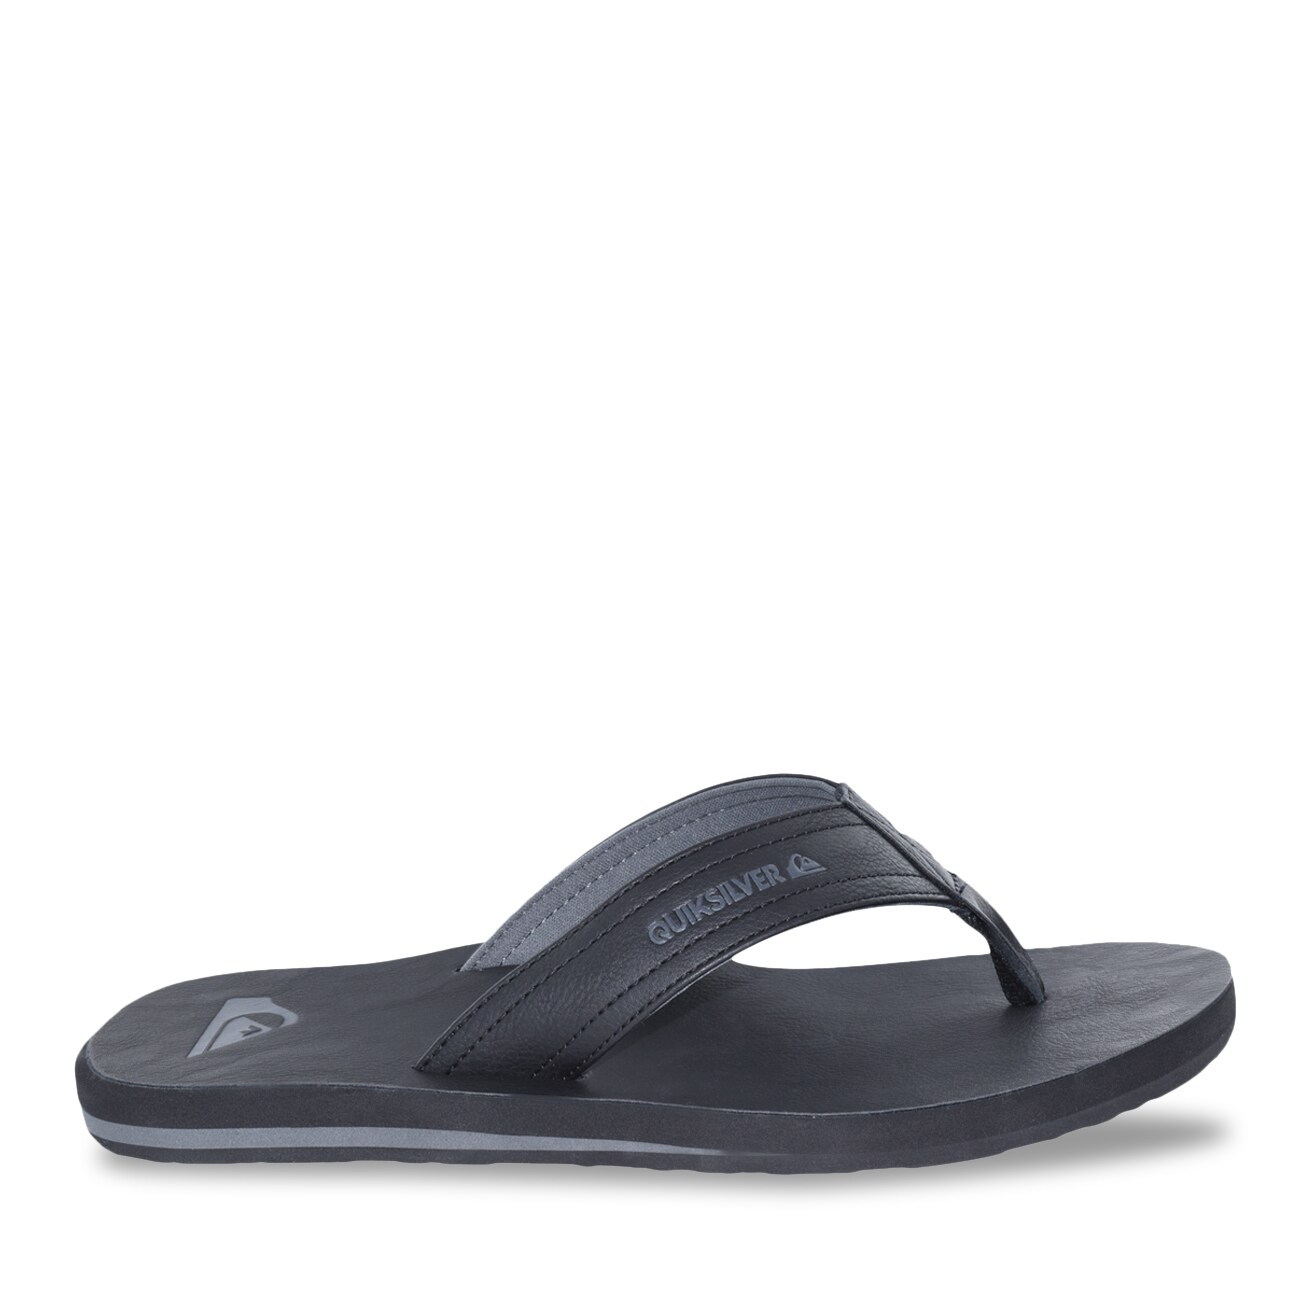 Quiksilver Carving 2 Sandal | DSW Canada